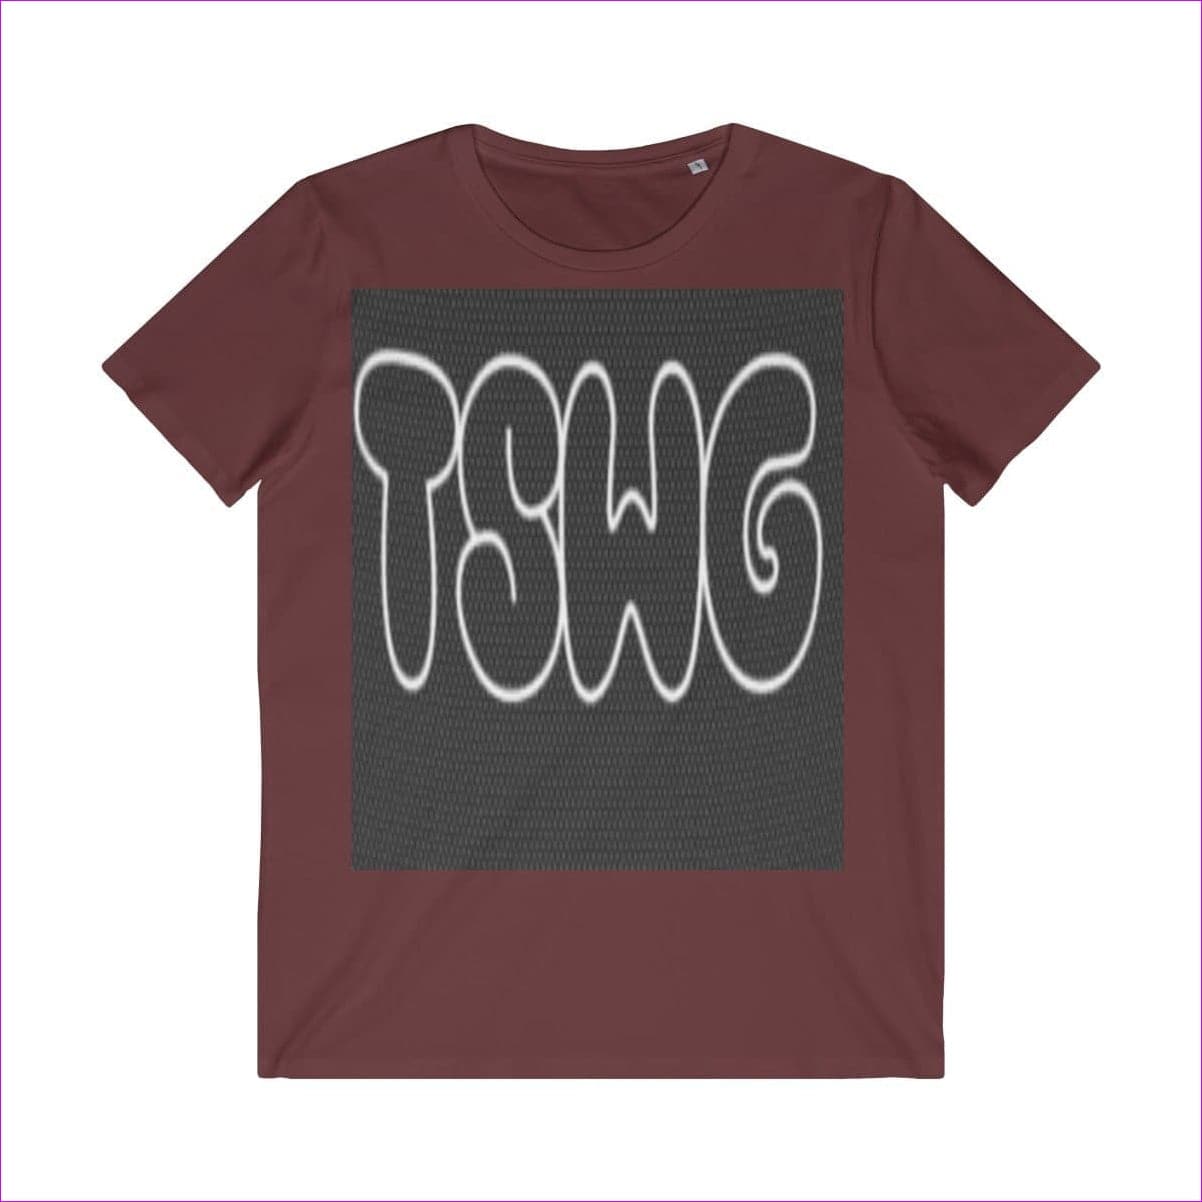 Burgundy TSWG ( Tough Smooth Well Groomed) Men's Organic Tee - T-Shirt at TFC&H Co.